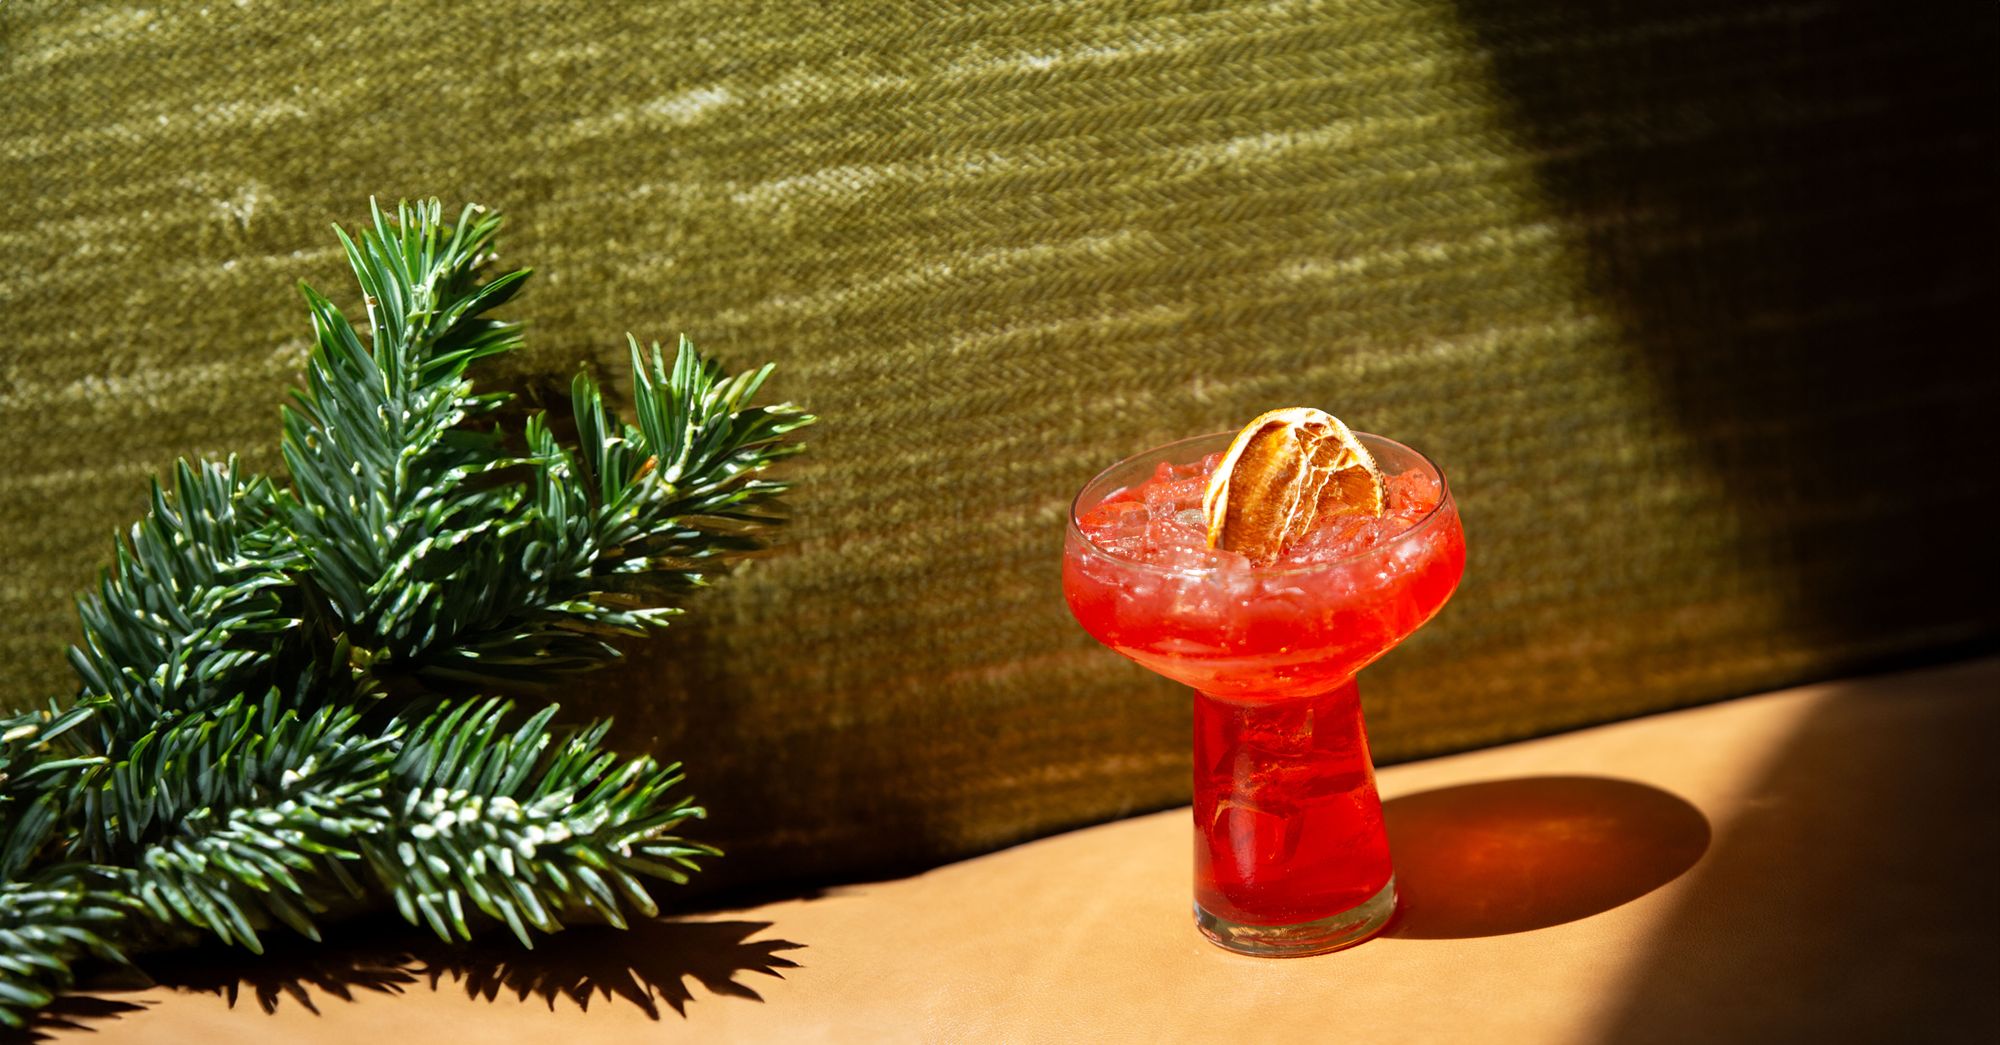 Planter-s-Punch-tequila-holiday-cocktail